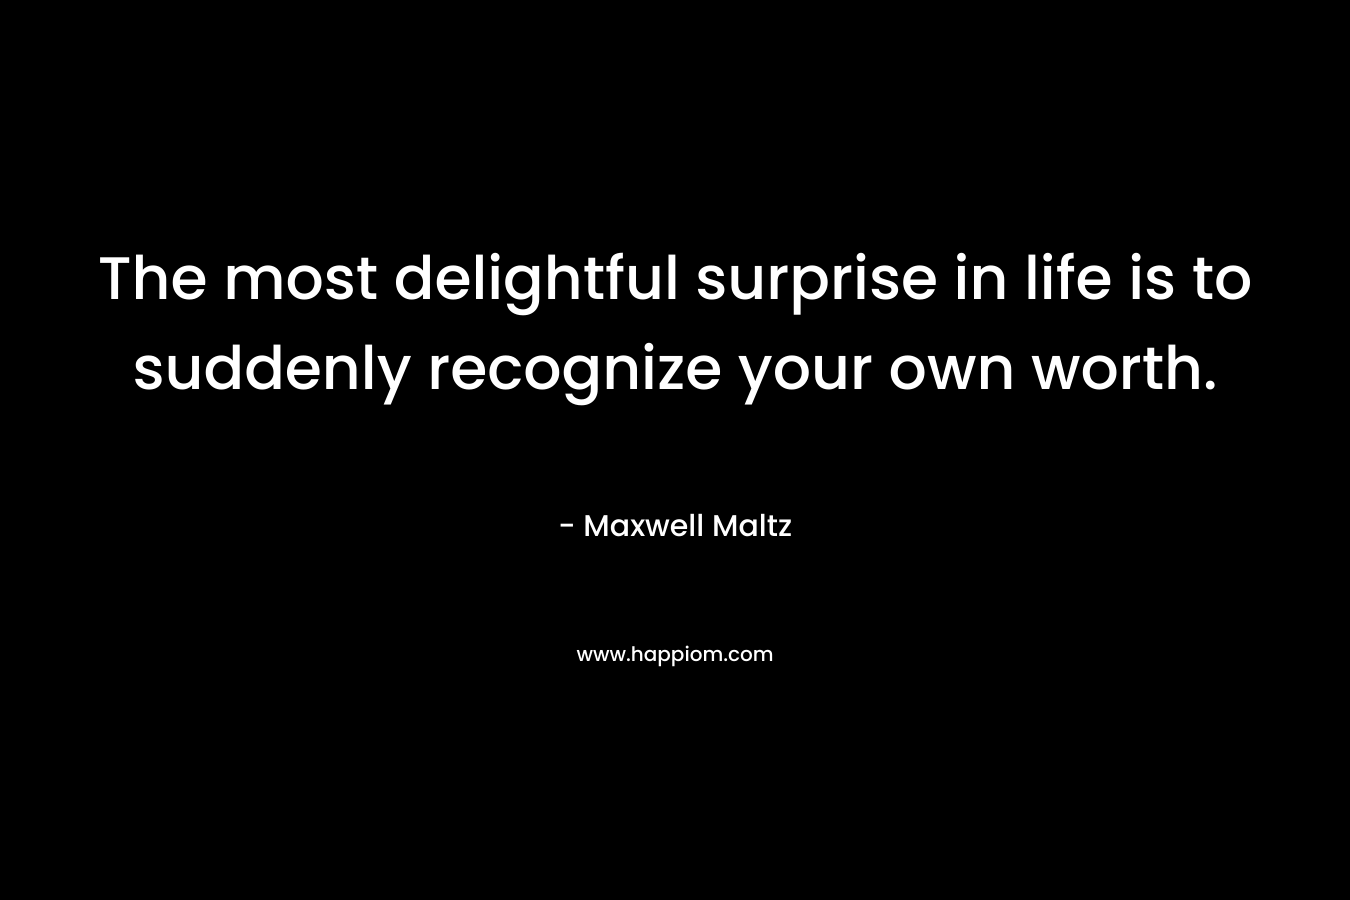 The most delightful surprise in life is to suddenly recognize your own worth.